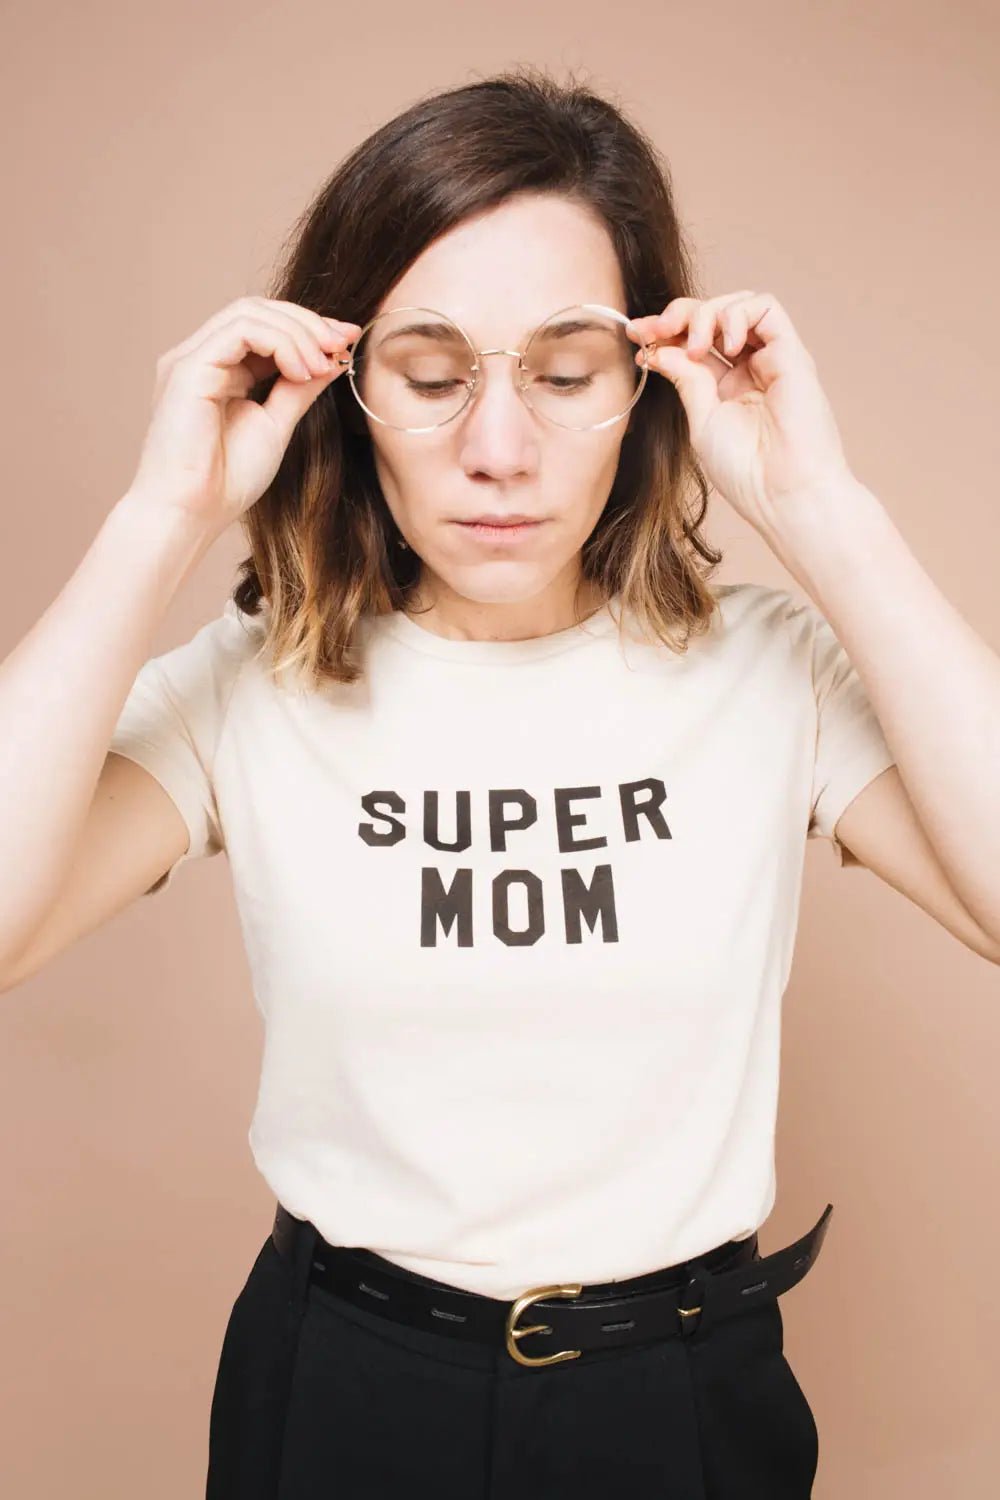 Super Mom - BY THE PEOPLE SHOP